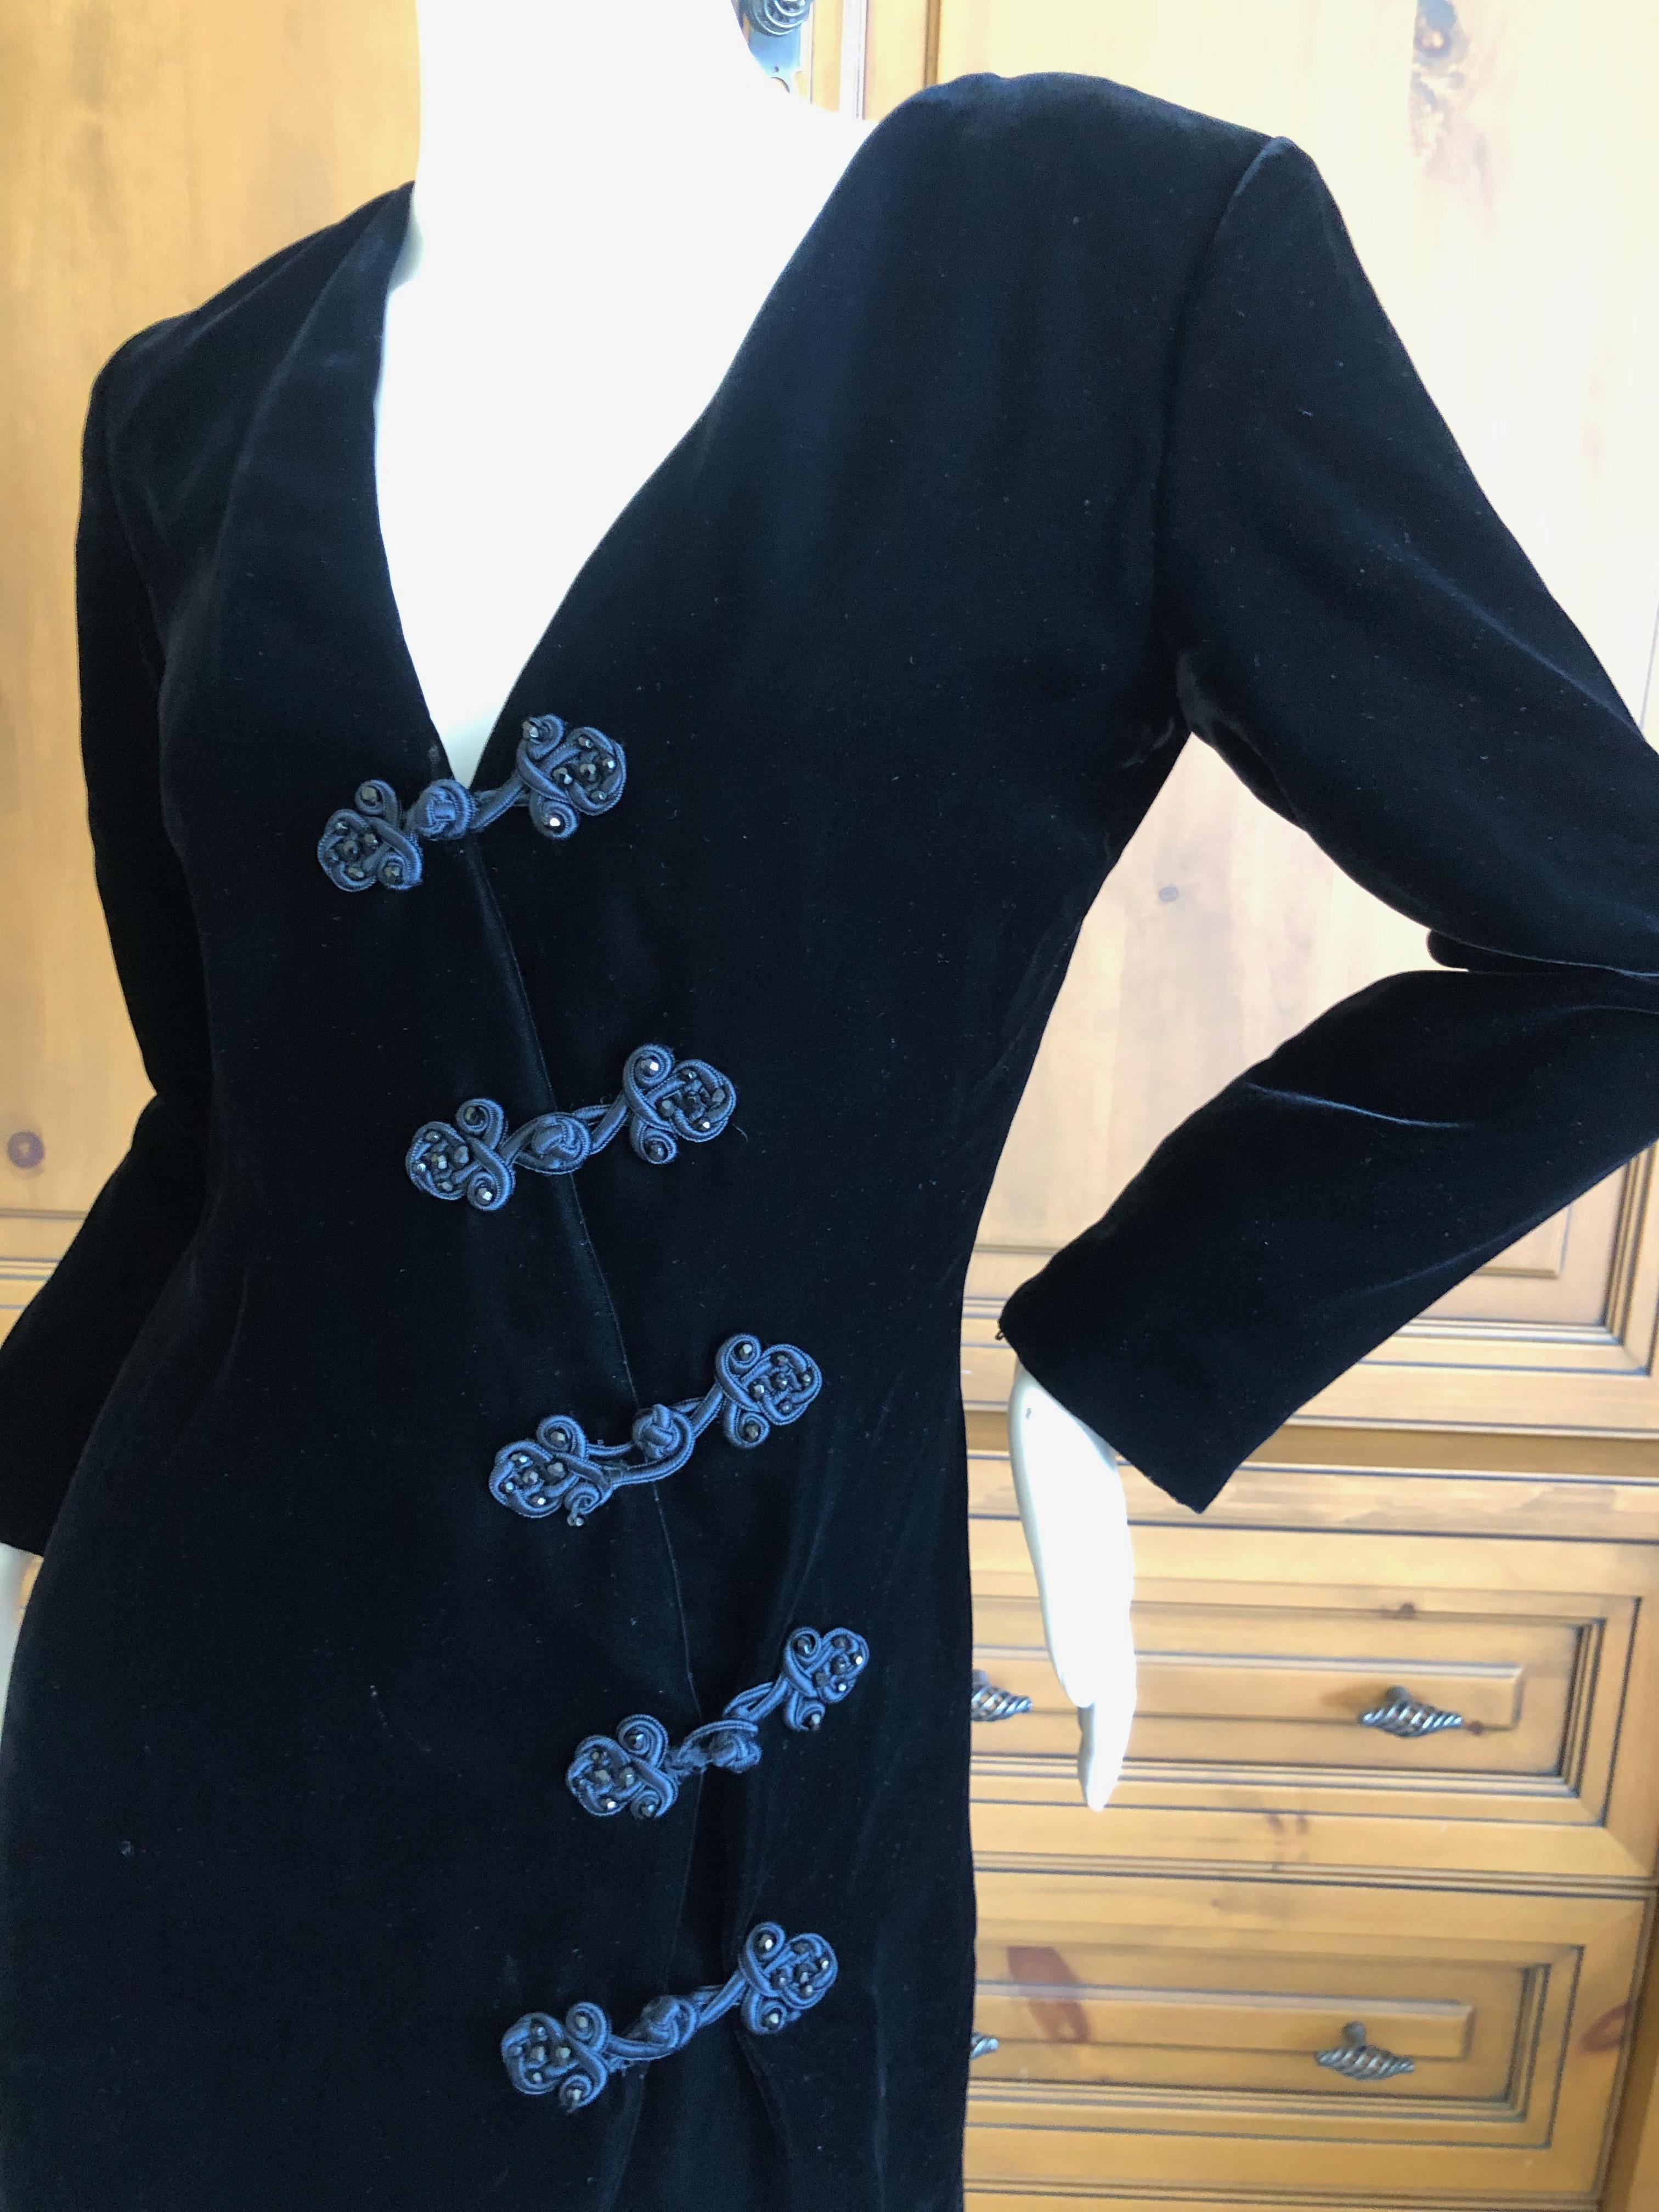 Yves Saint Laurent 70's Rive Gauche Velvet Mini Dress with Diagonal Frog Closure.
This is so pretty, inspired by the Cheongsam , with turquoise silk lining and beaded frog closures.
 Size 36
Bust 36